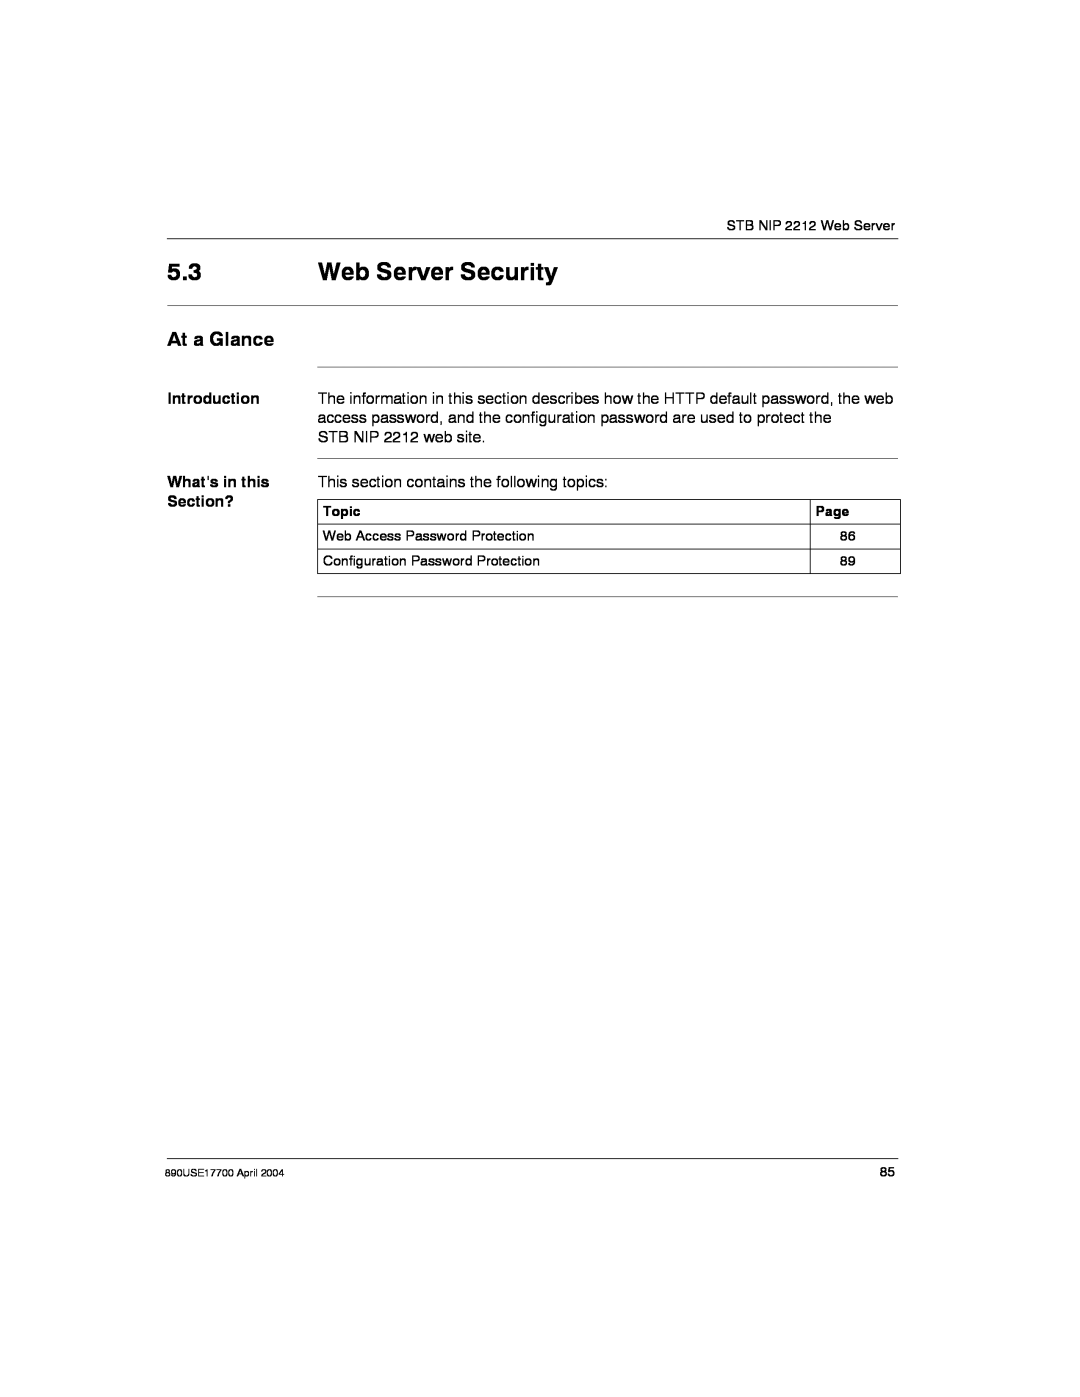 Schneider Electric manual Web Server Security, At a Glance, 890USE17700 April 